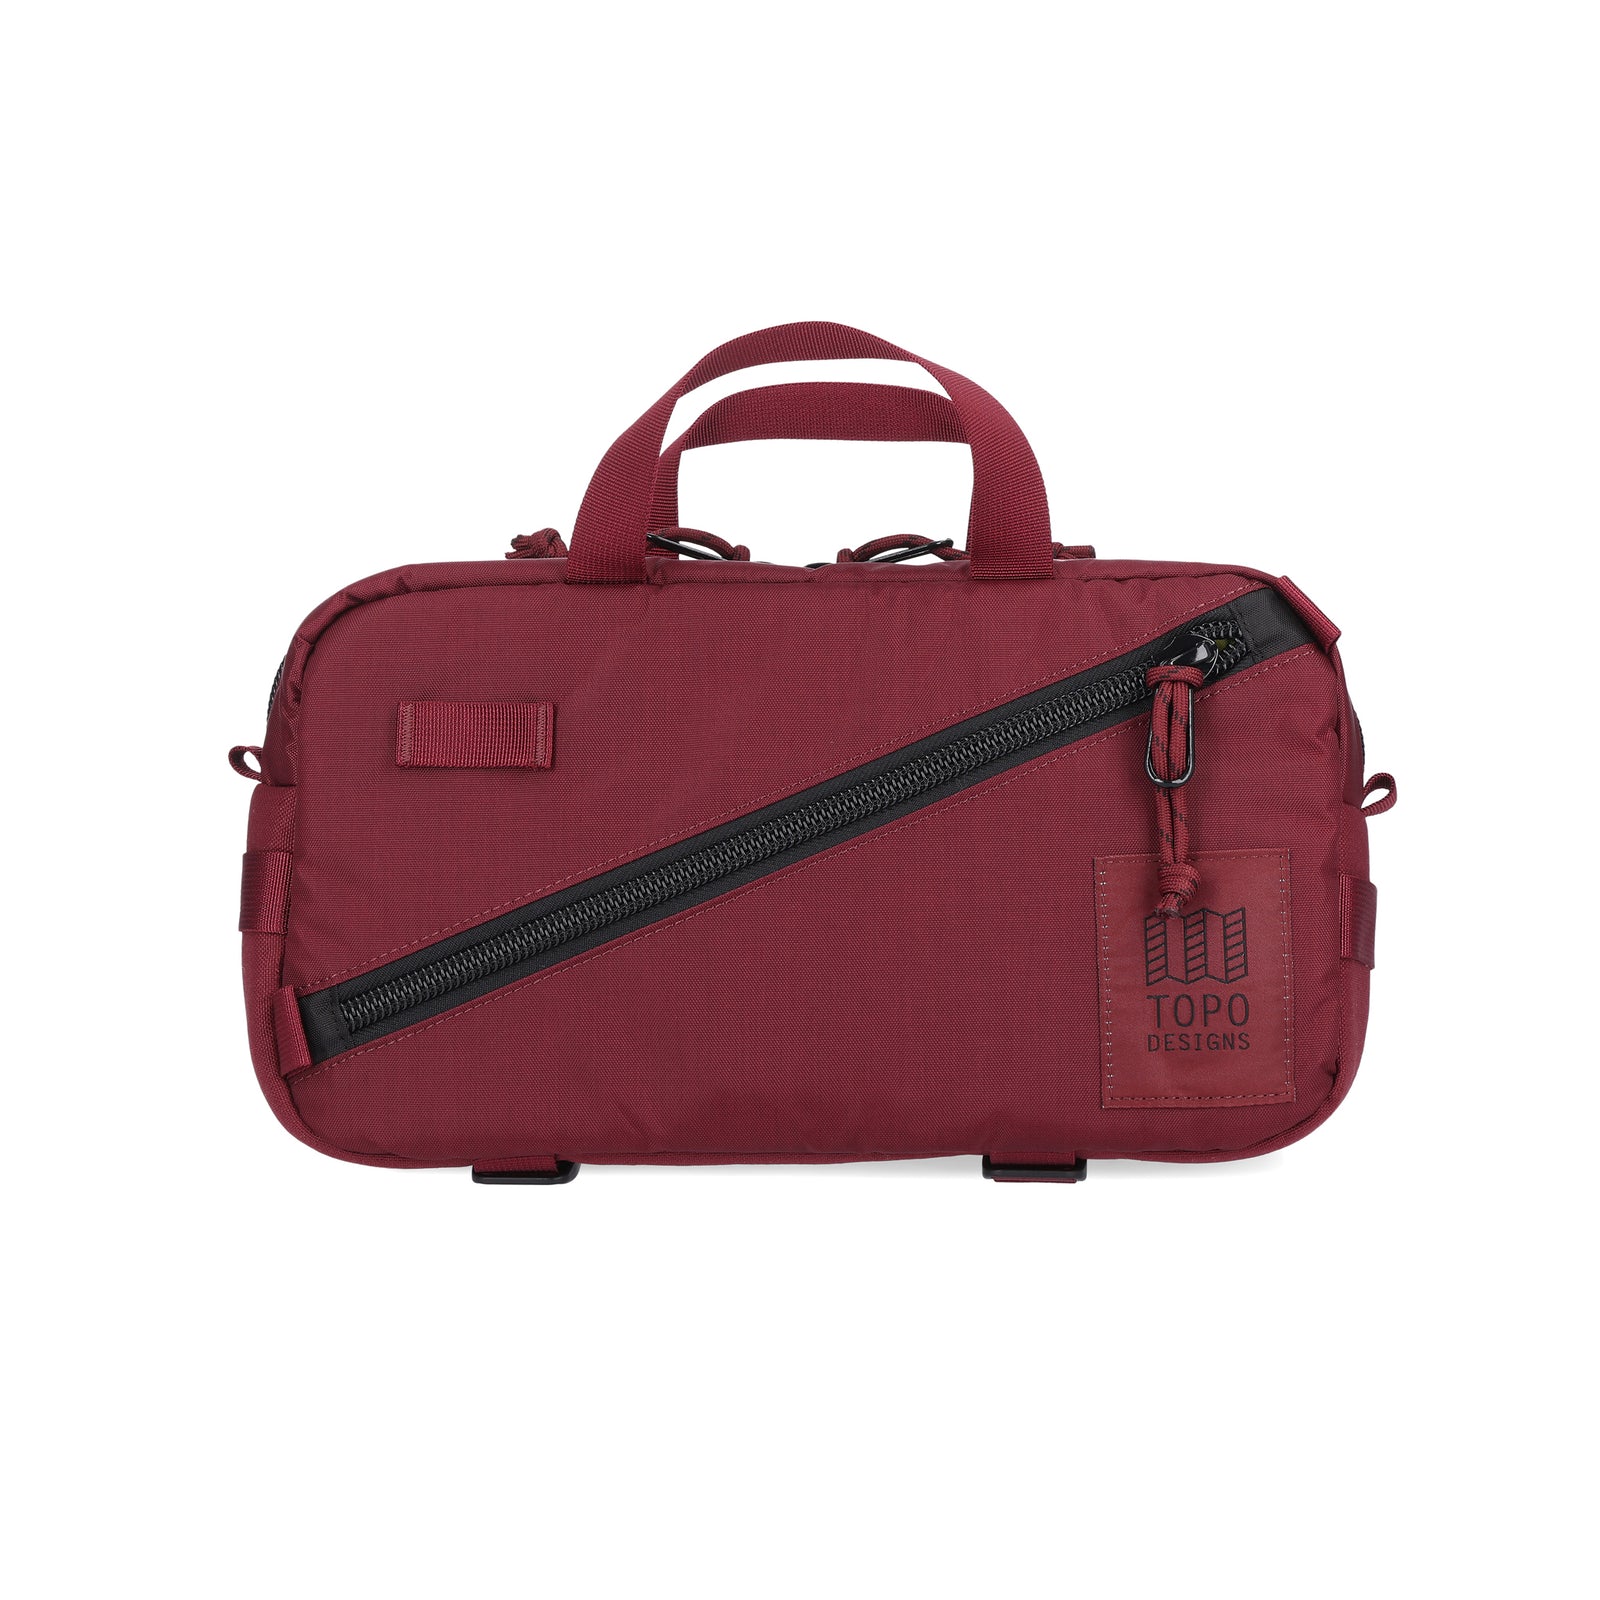 Topo Designs Quick Pack hip fanny pack in "Burgundy" red recycled nylon.